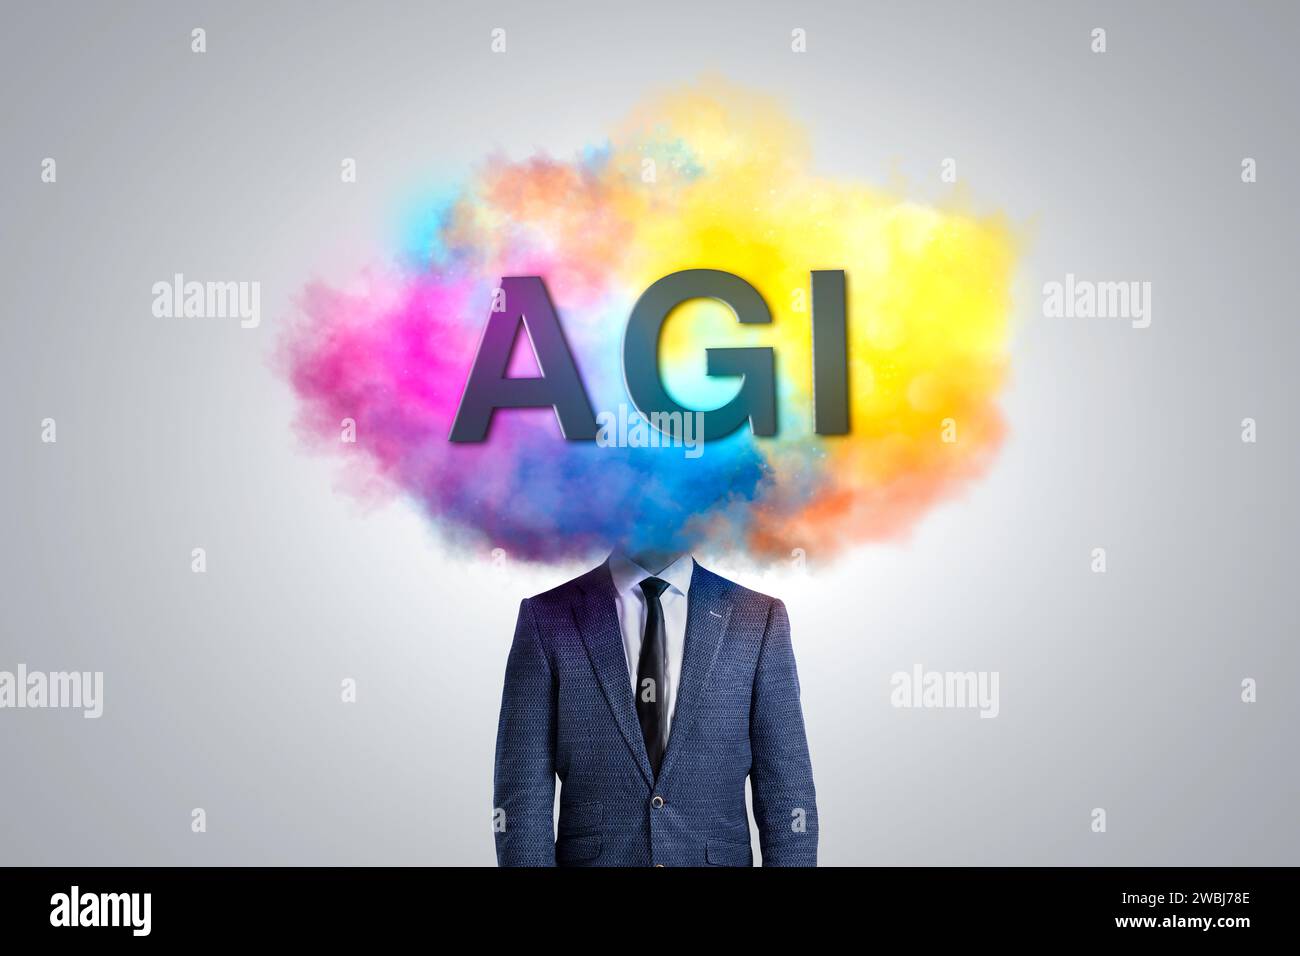 A Person's Head Covered in a Colorful Cloud Labeled AGI Stock Photo